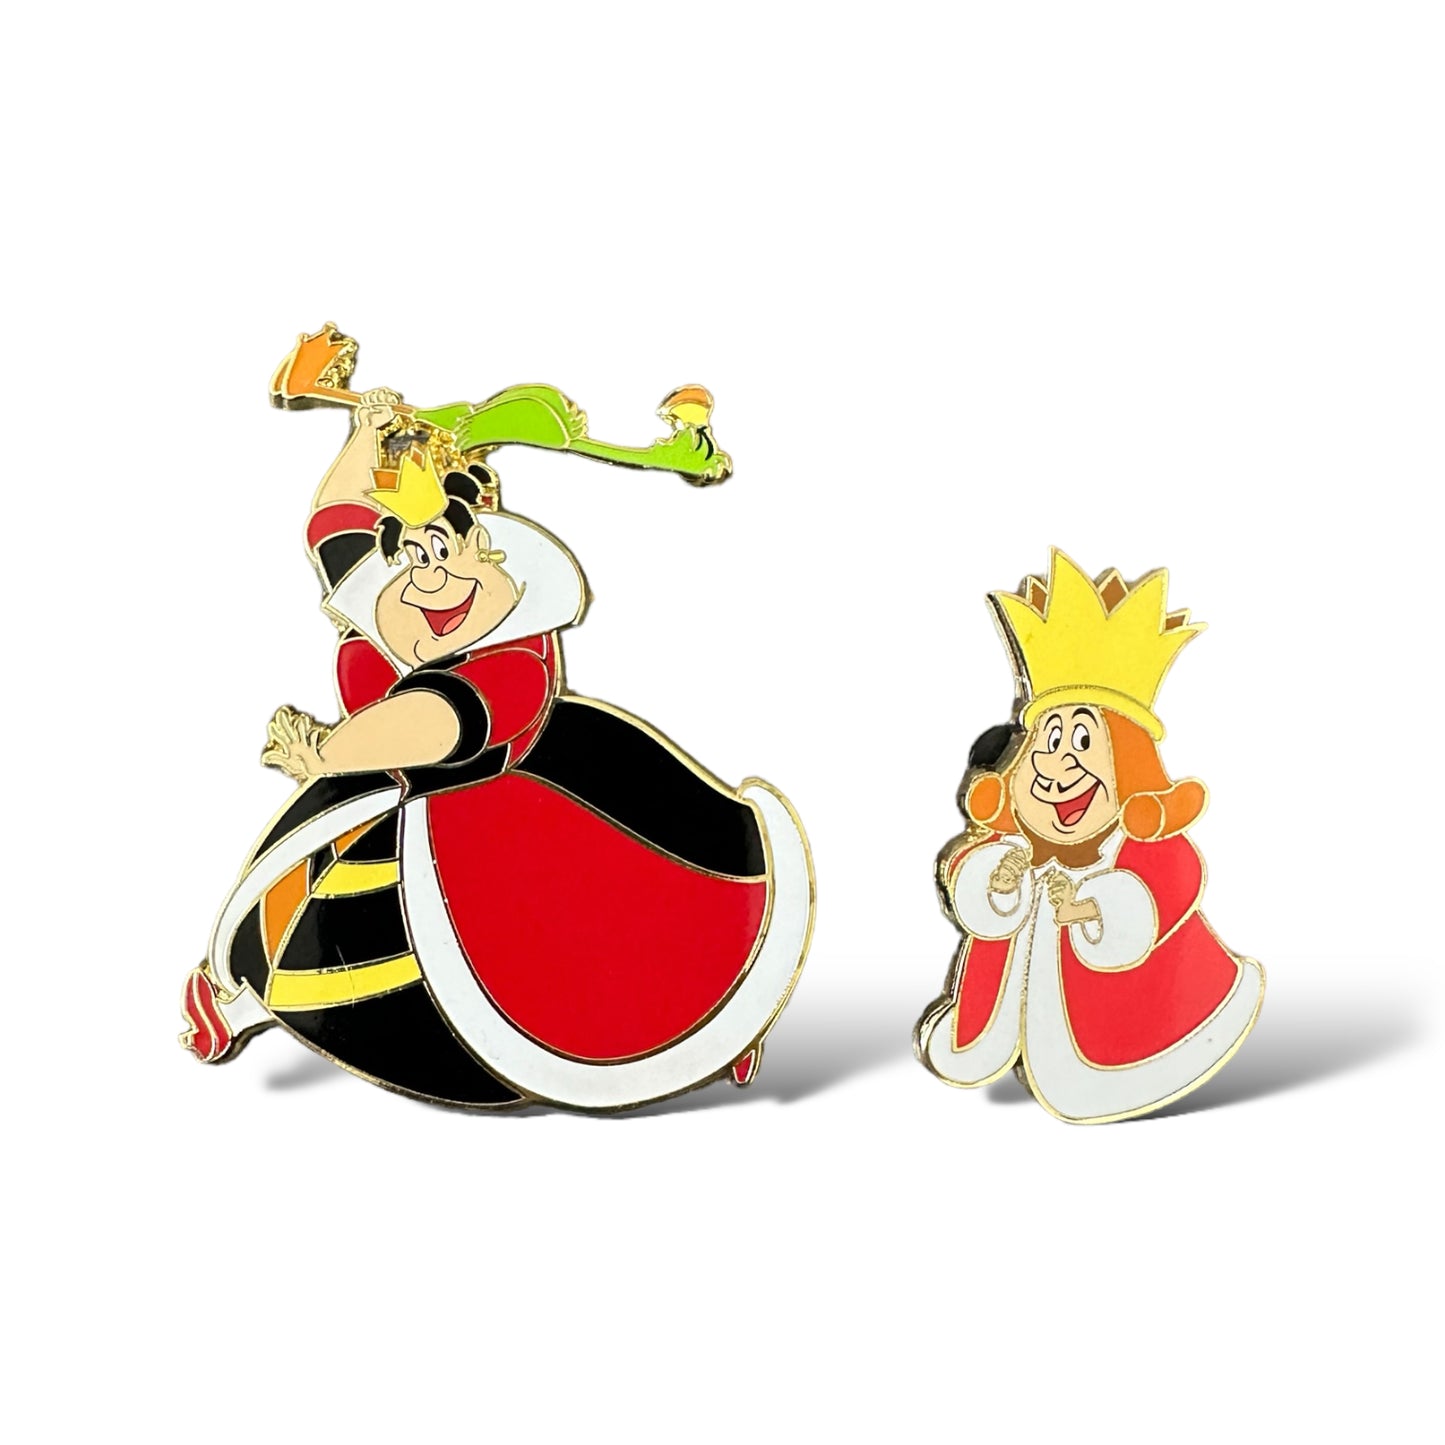 DLRP Alice in Wonderland King and Queen of Hearts 2 Pin Set